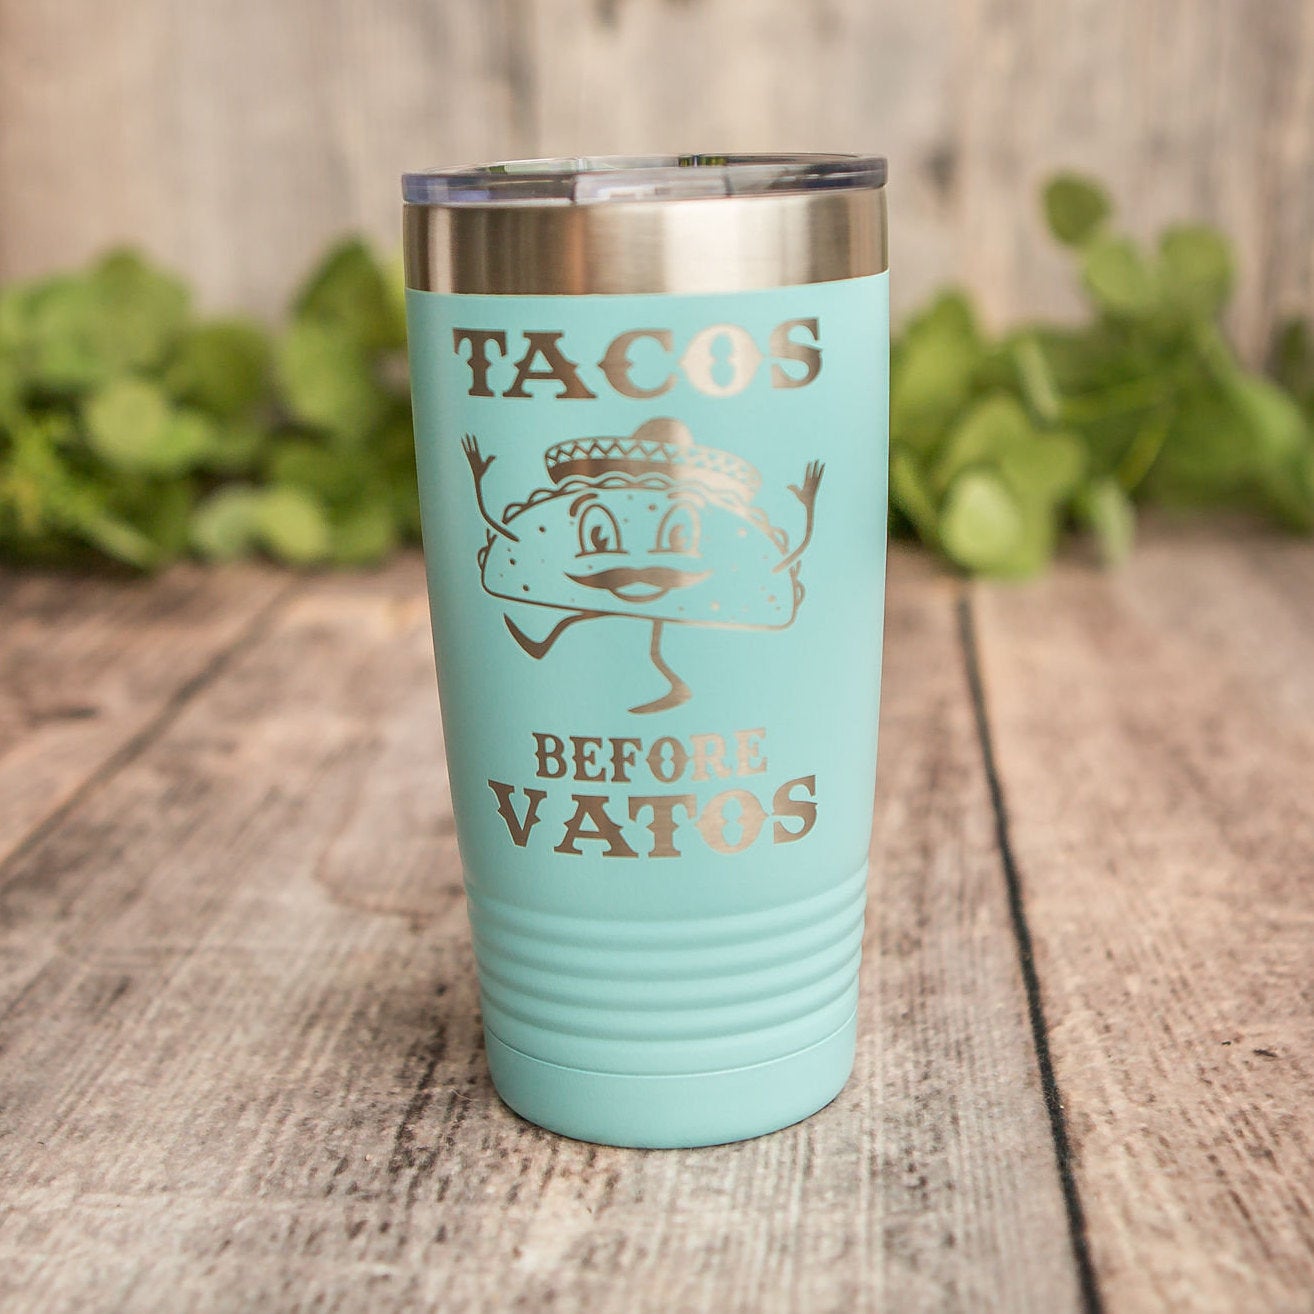 Gym Now Tacos Later - Engraved 10 oz Tumbler Cup Unique Funny